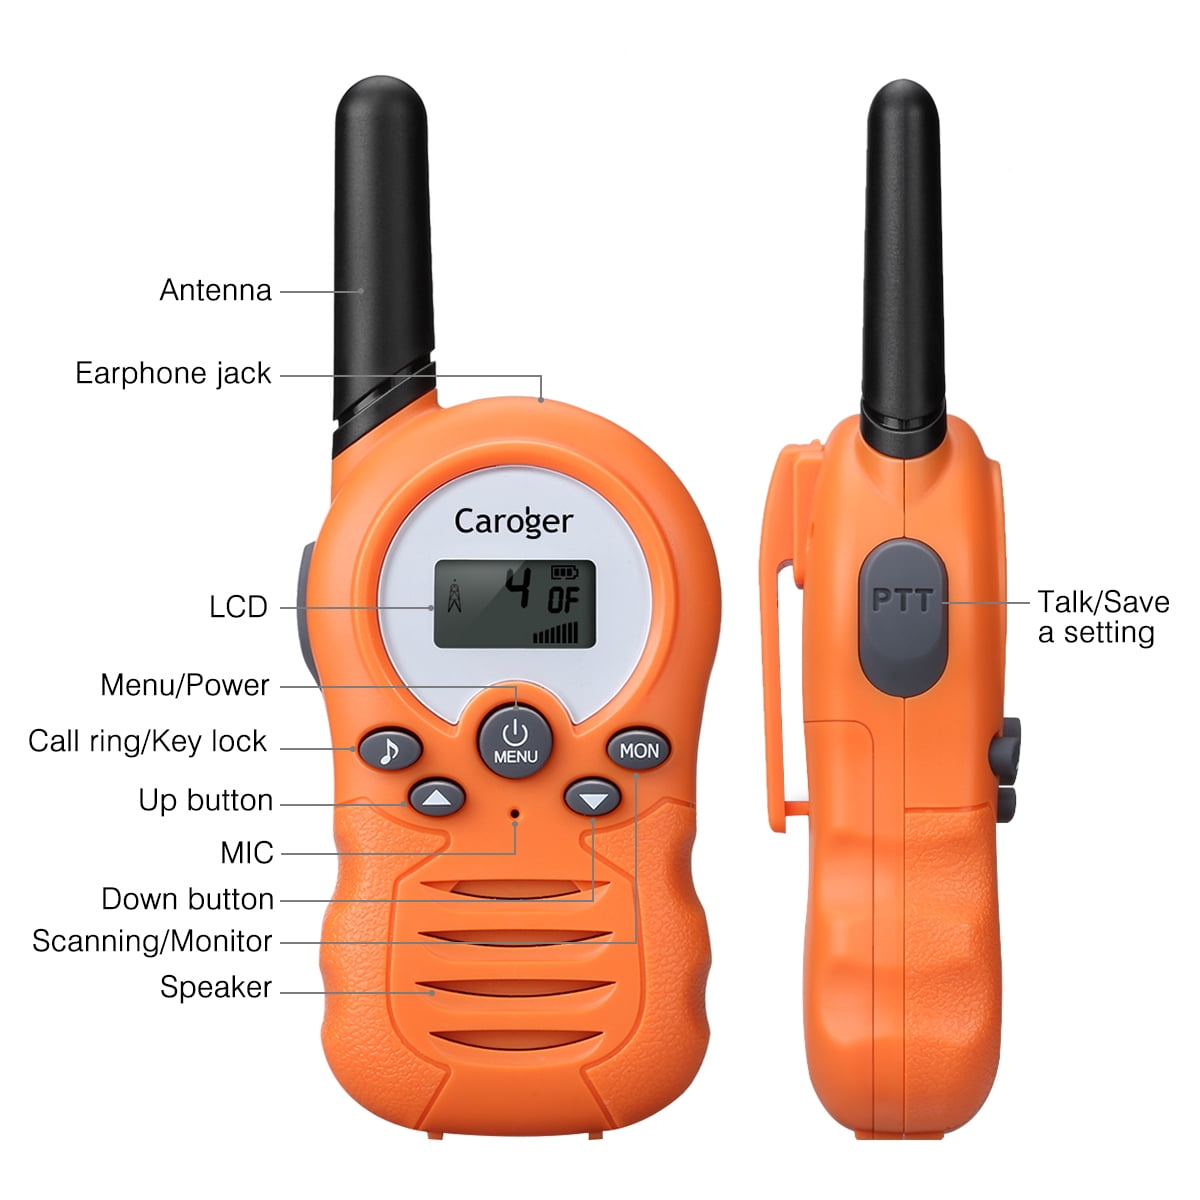 Alapa Walkie Talkies for Kids Voice Activated Walkie Talkies for Adults and Kids 3 Mile Range 2 Way Radio Walkie Talkies Built in Flash Light Camo Exterior Vox 2 Pack 